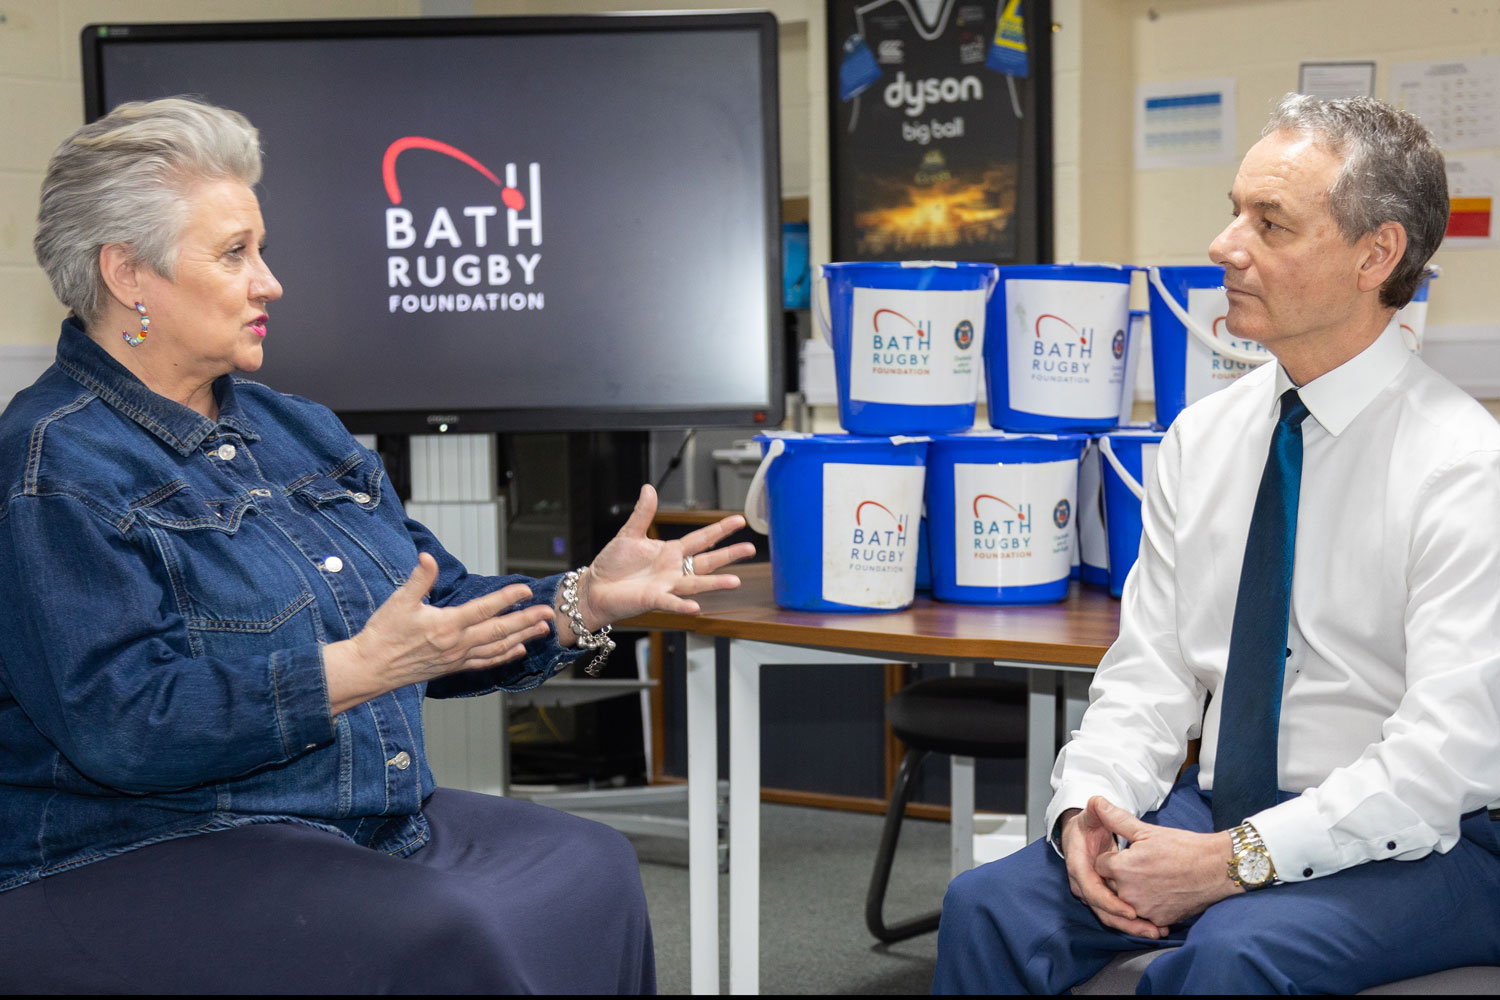 Thrings Meets Bath rugby foundation